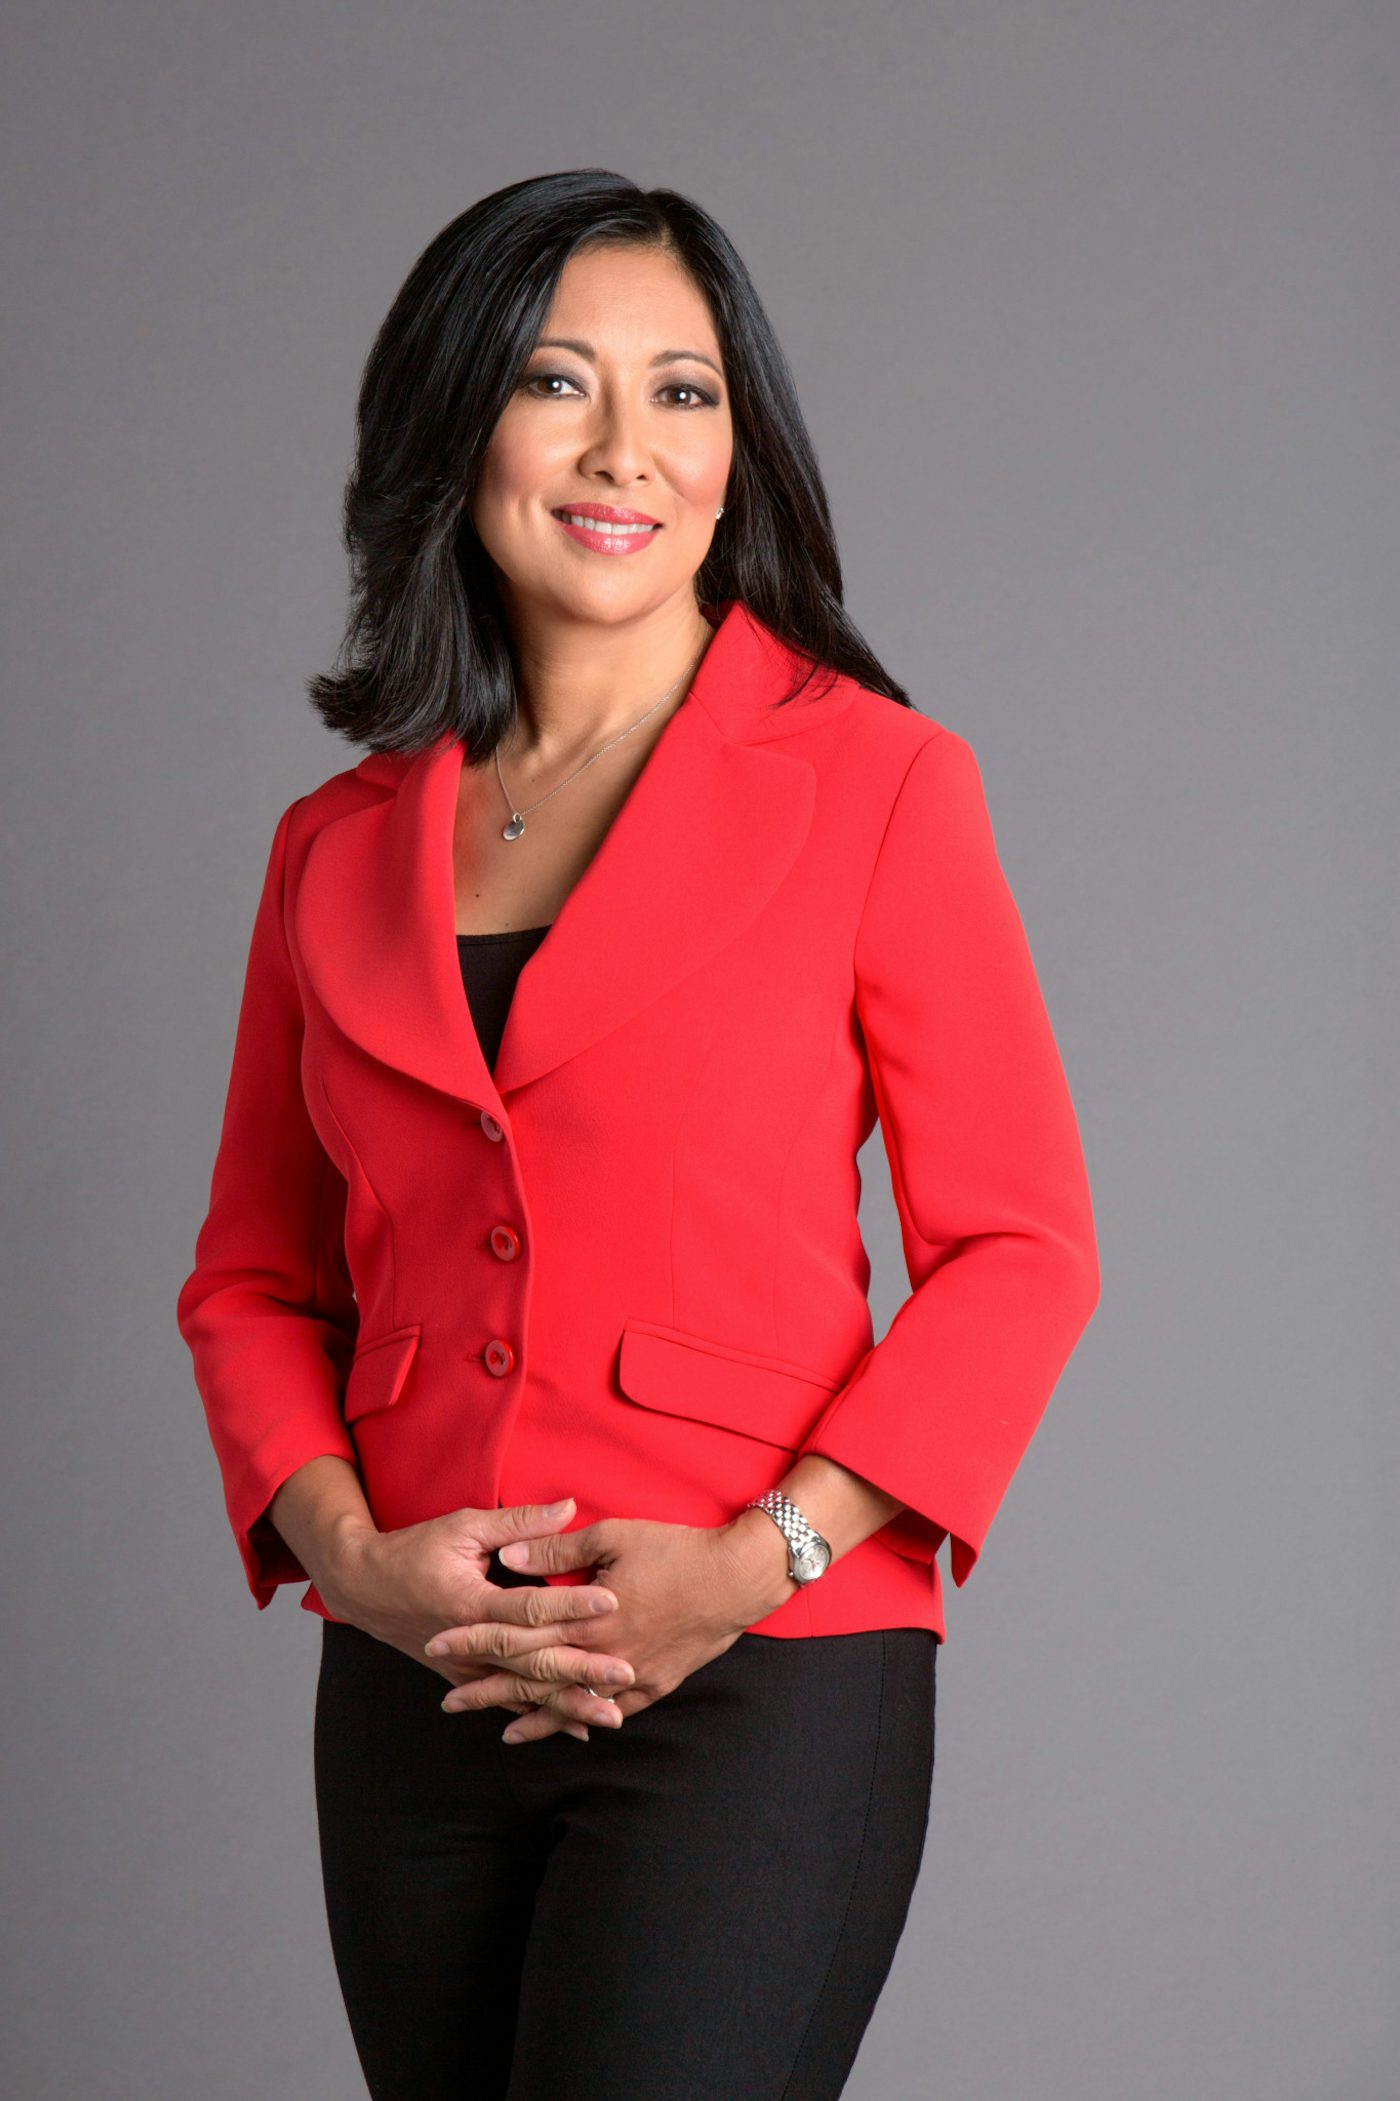 Image for the CTV News Toronto Adds Weekday Newscast at 5 p.m. Anchored by Zuraidah Alman, Beginning November 13 press release